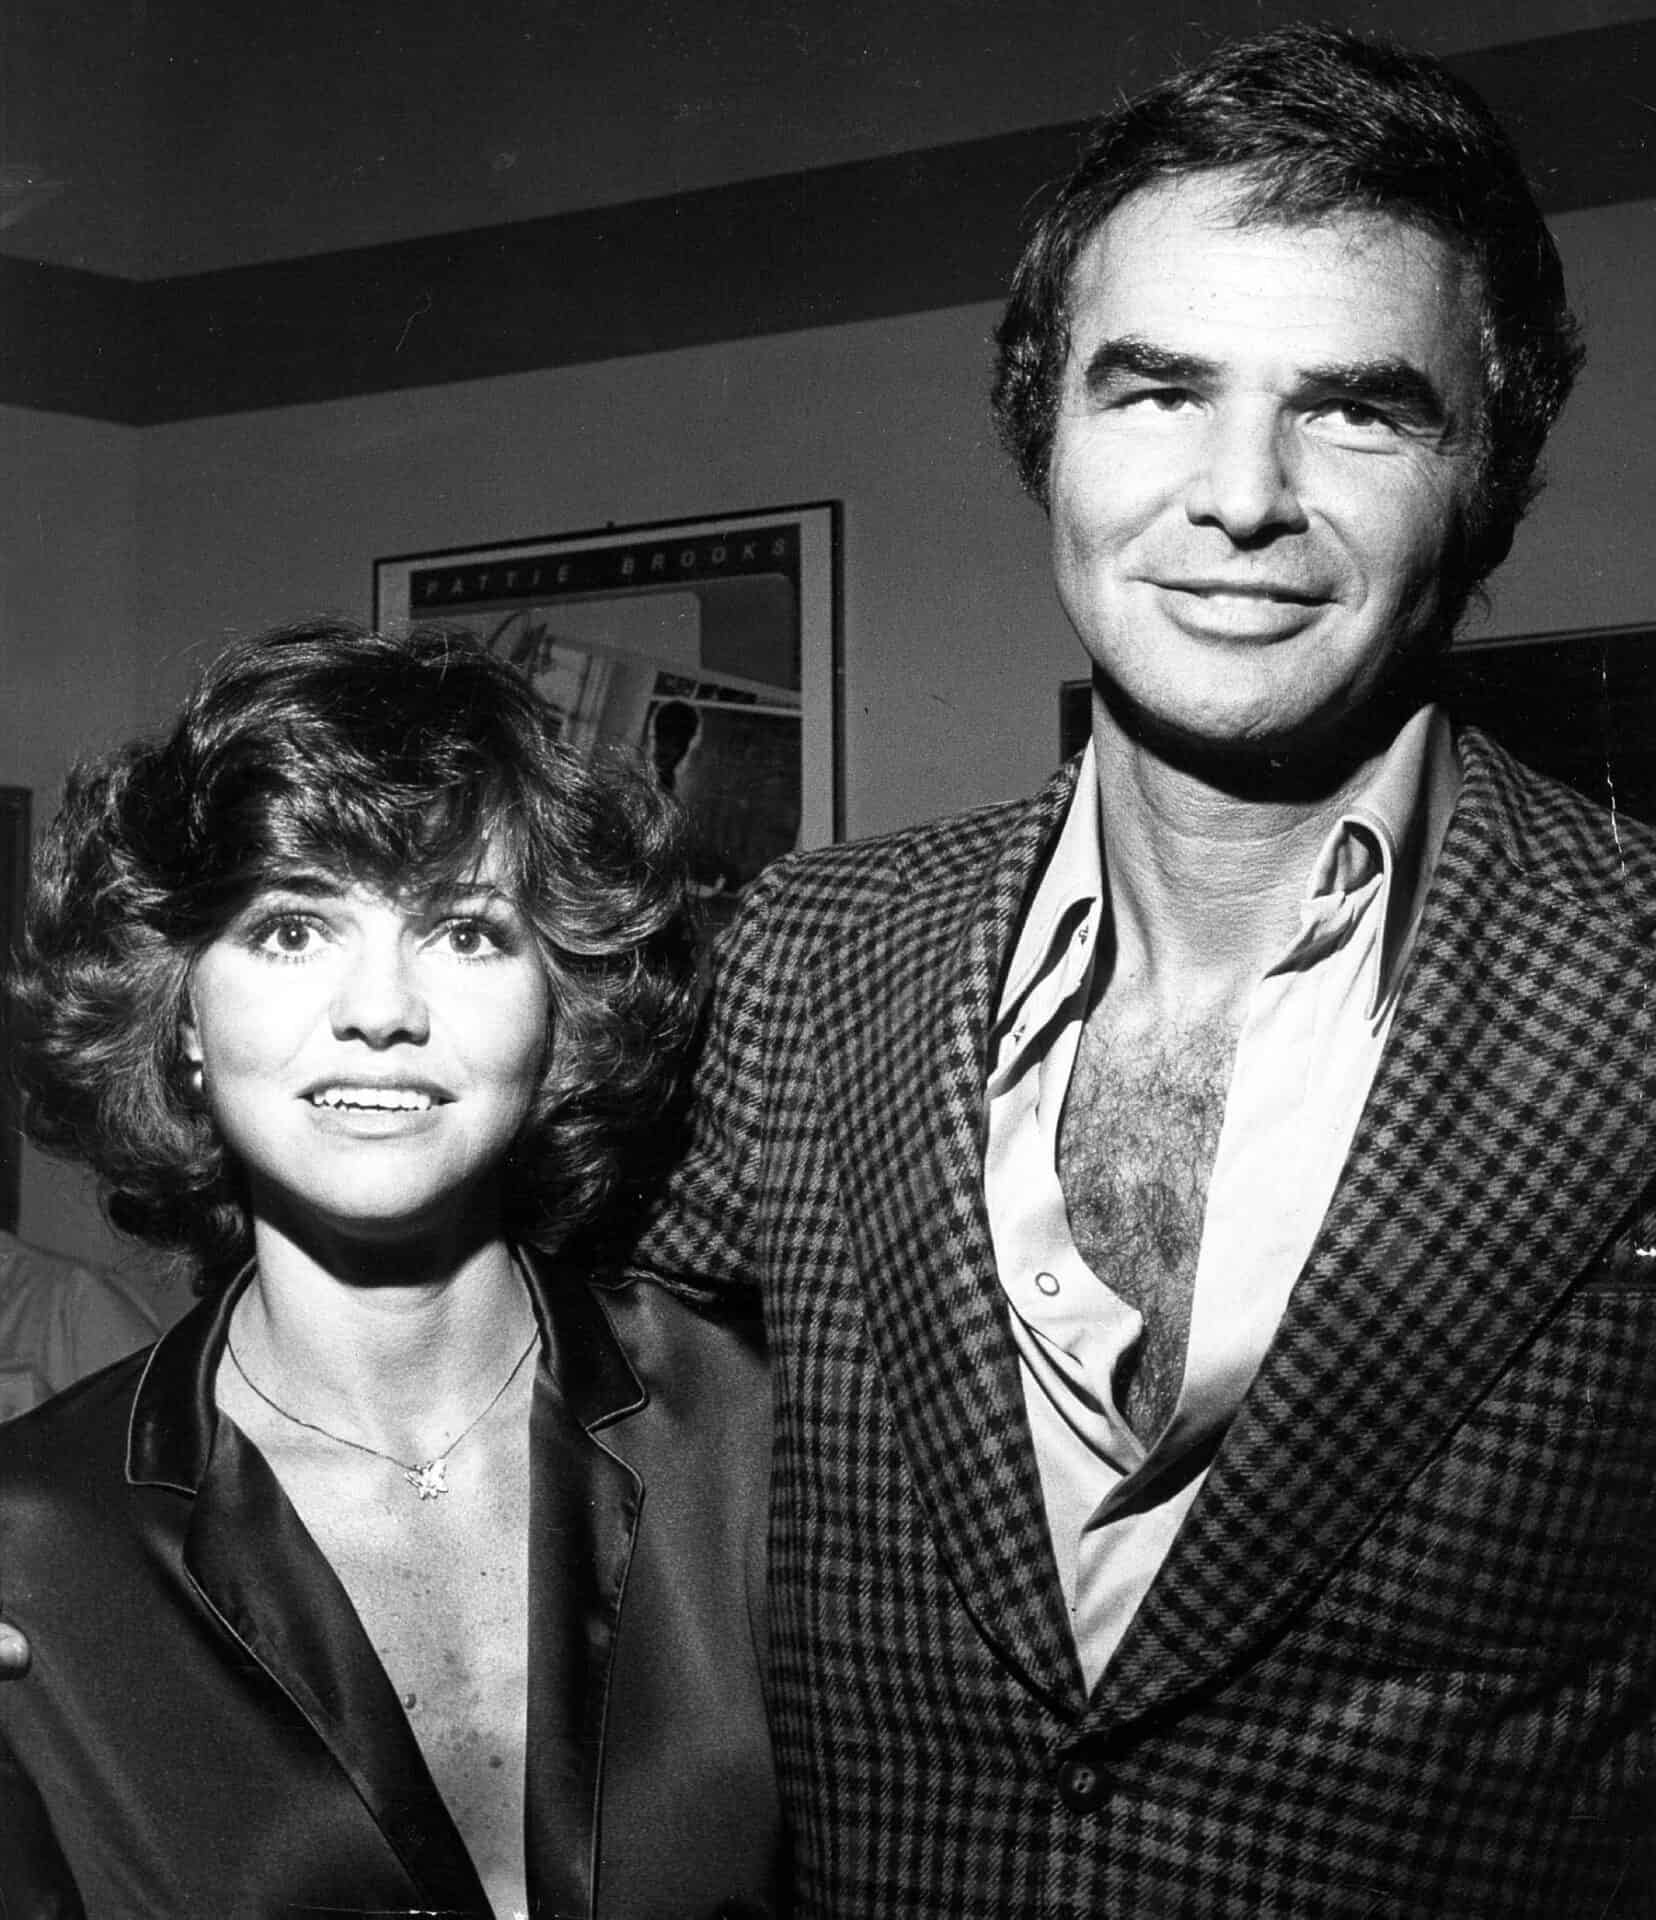 sally-field-comments-on-passing-of-burt-reynolds-inside-pulse